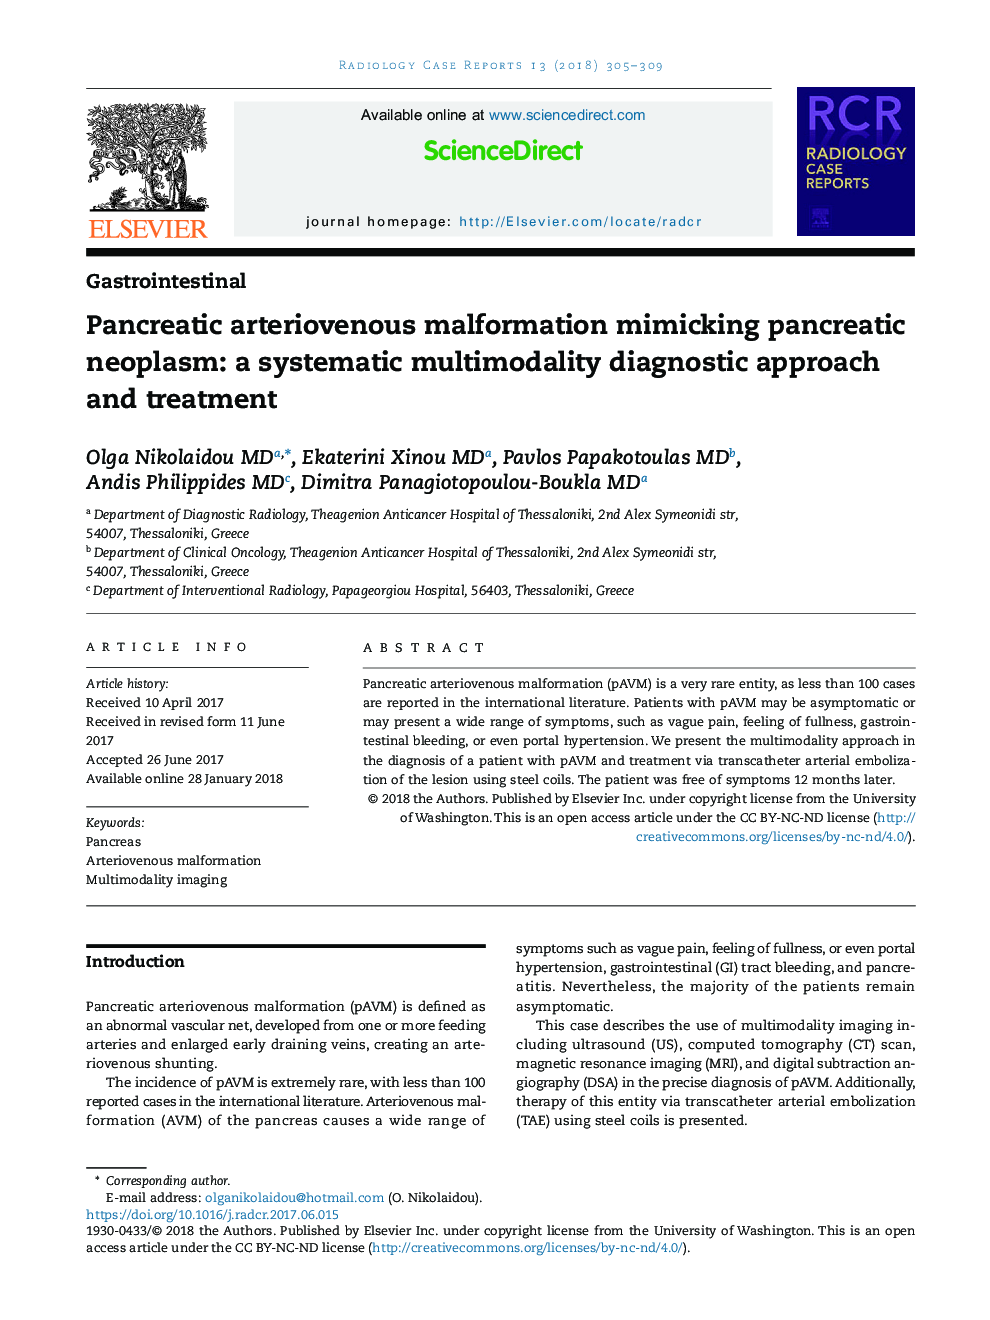 Pancreatic arteriovenous malformation mimicking pancreatic neoplasm: a systematic multimodality diagnostic approach and treatment